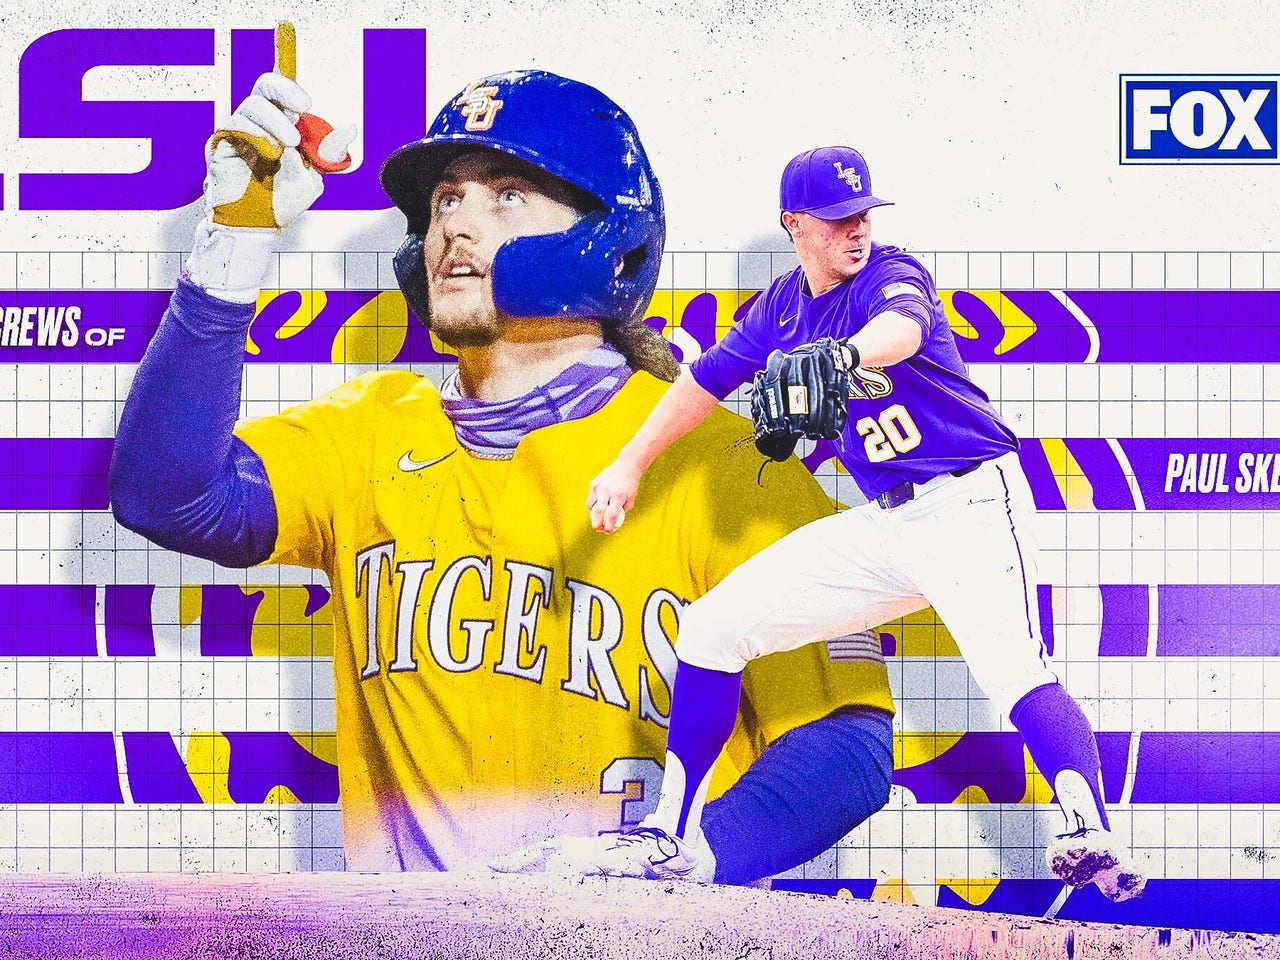 Dylan Crews, Paul Skenes could make MLB Draft history after leading LSU back to Omaha FOX Sports